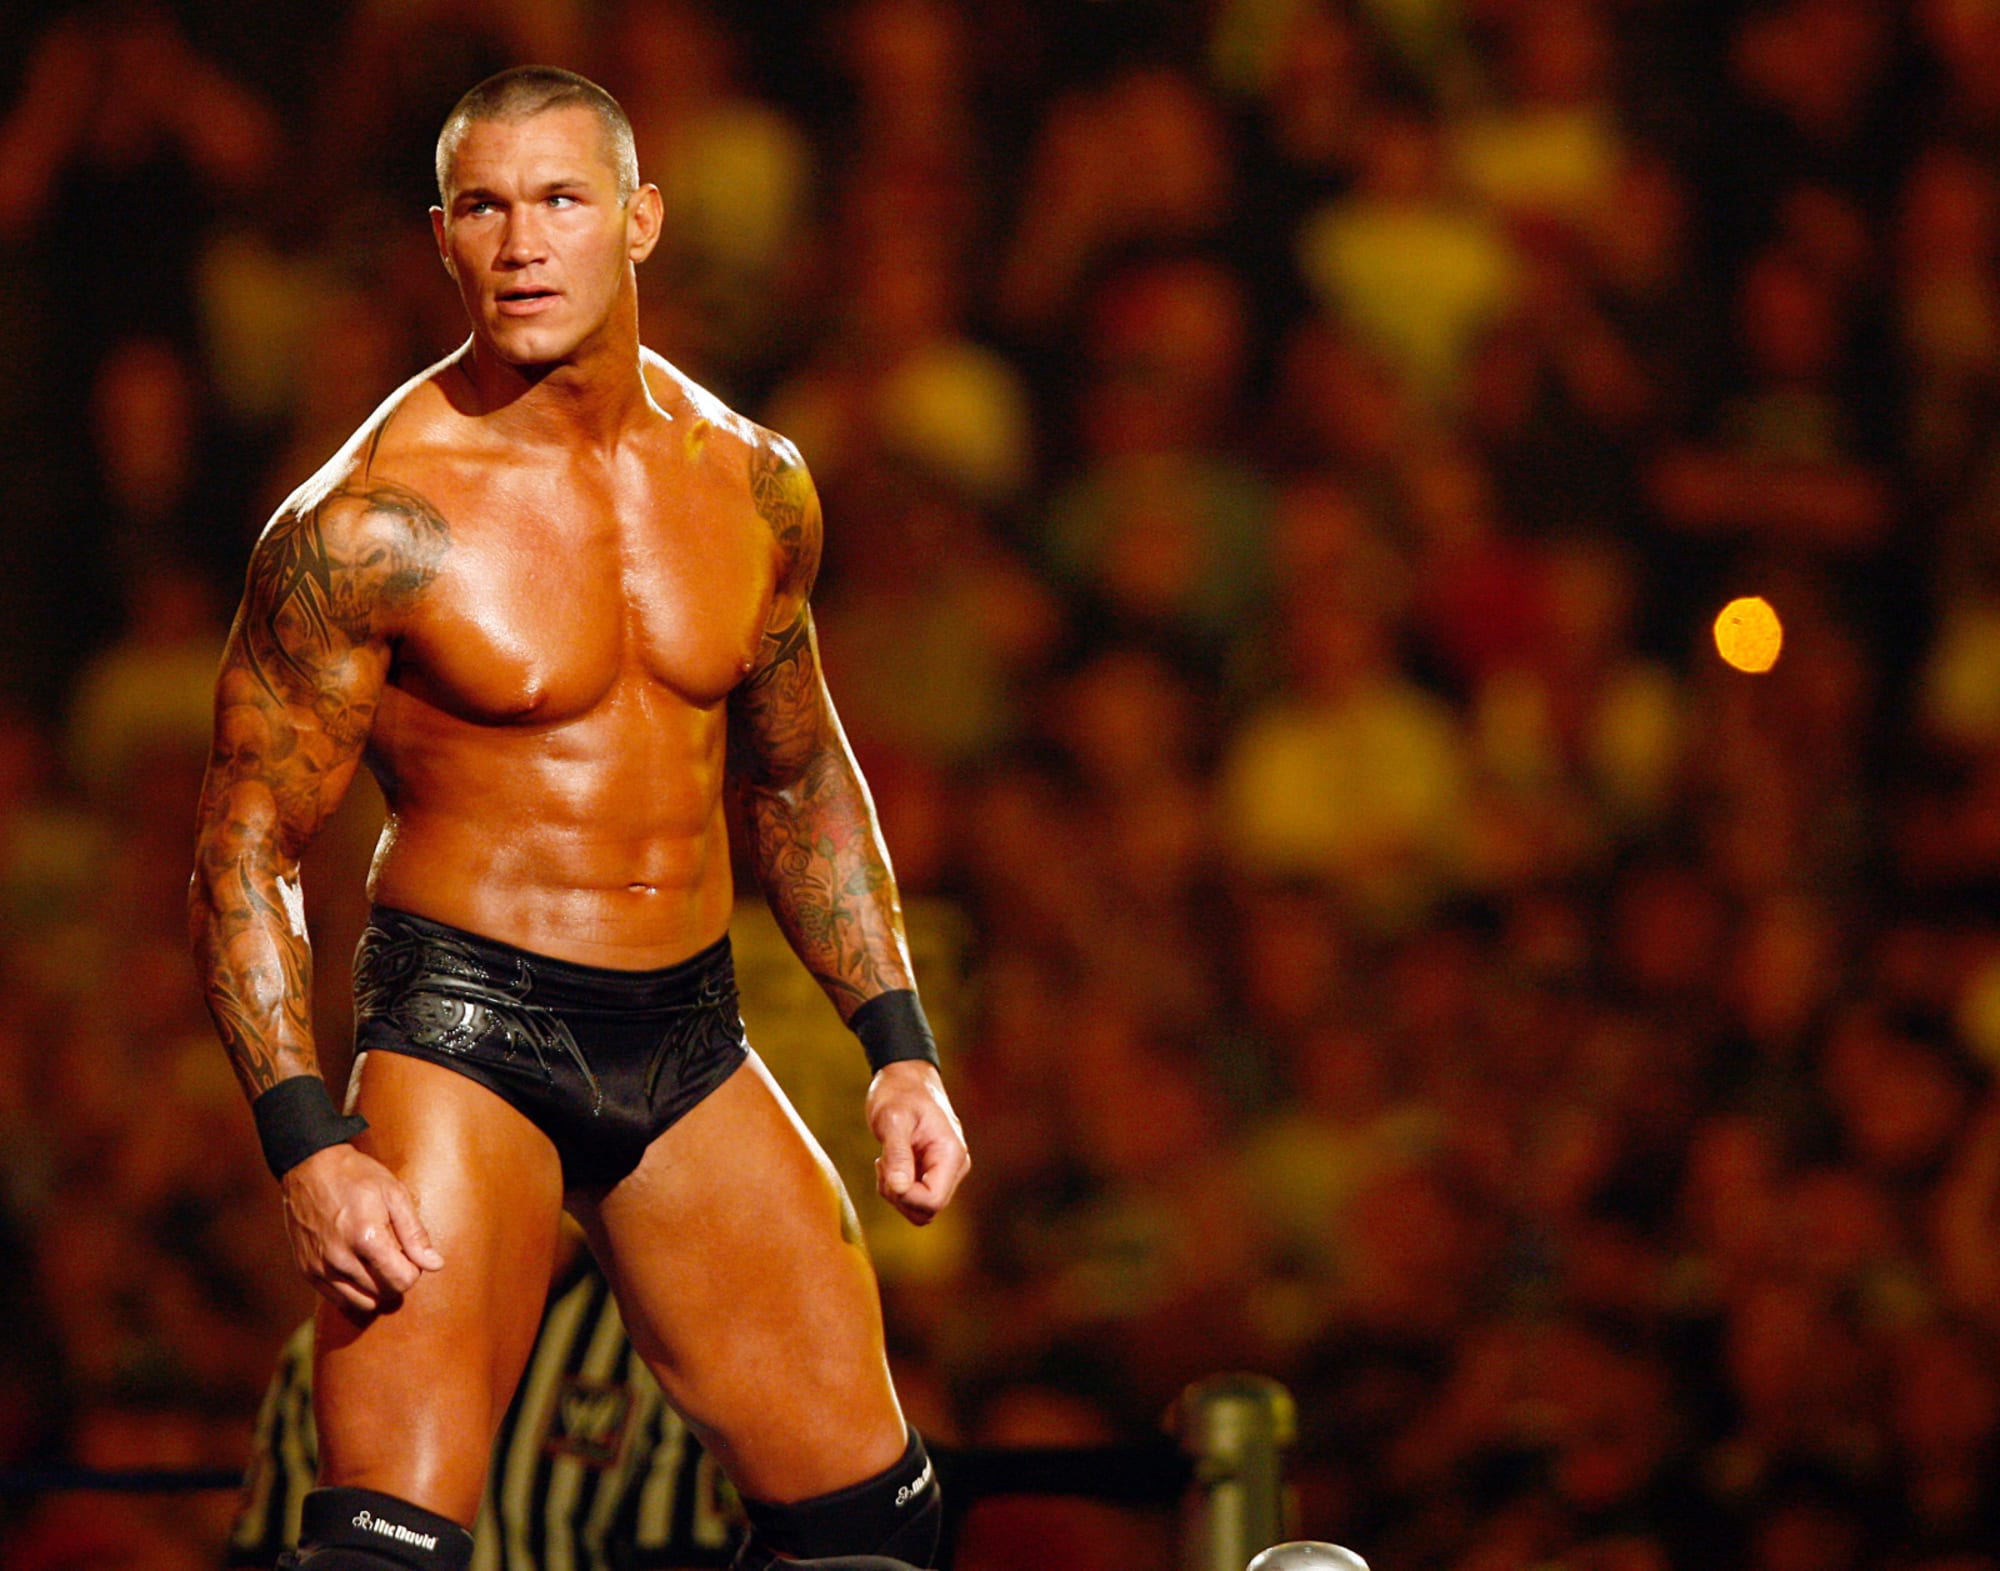 Randy Orton collaborates with Riddle on Raw (WWE)